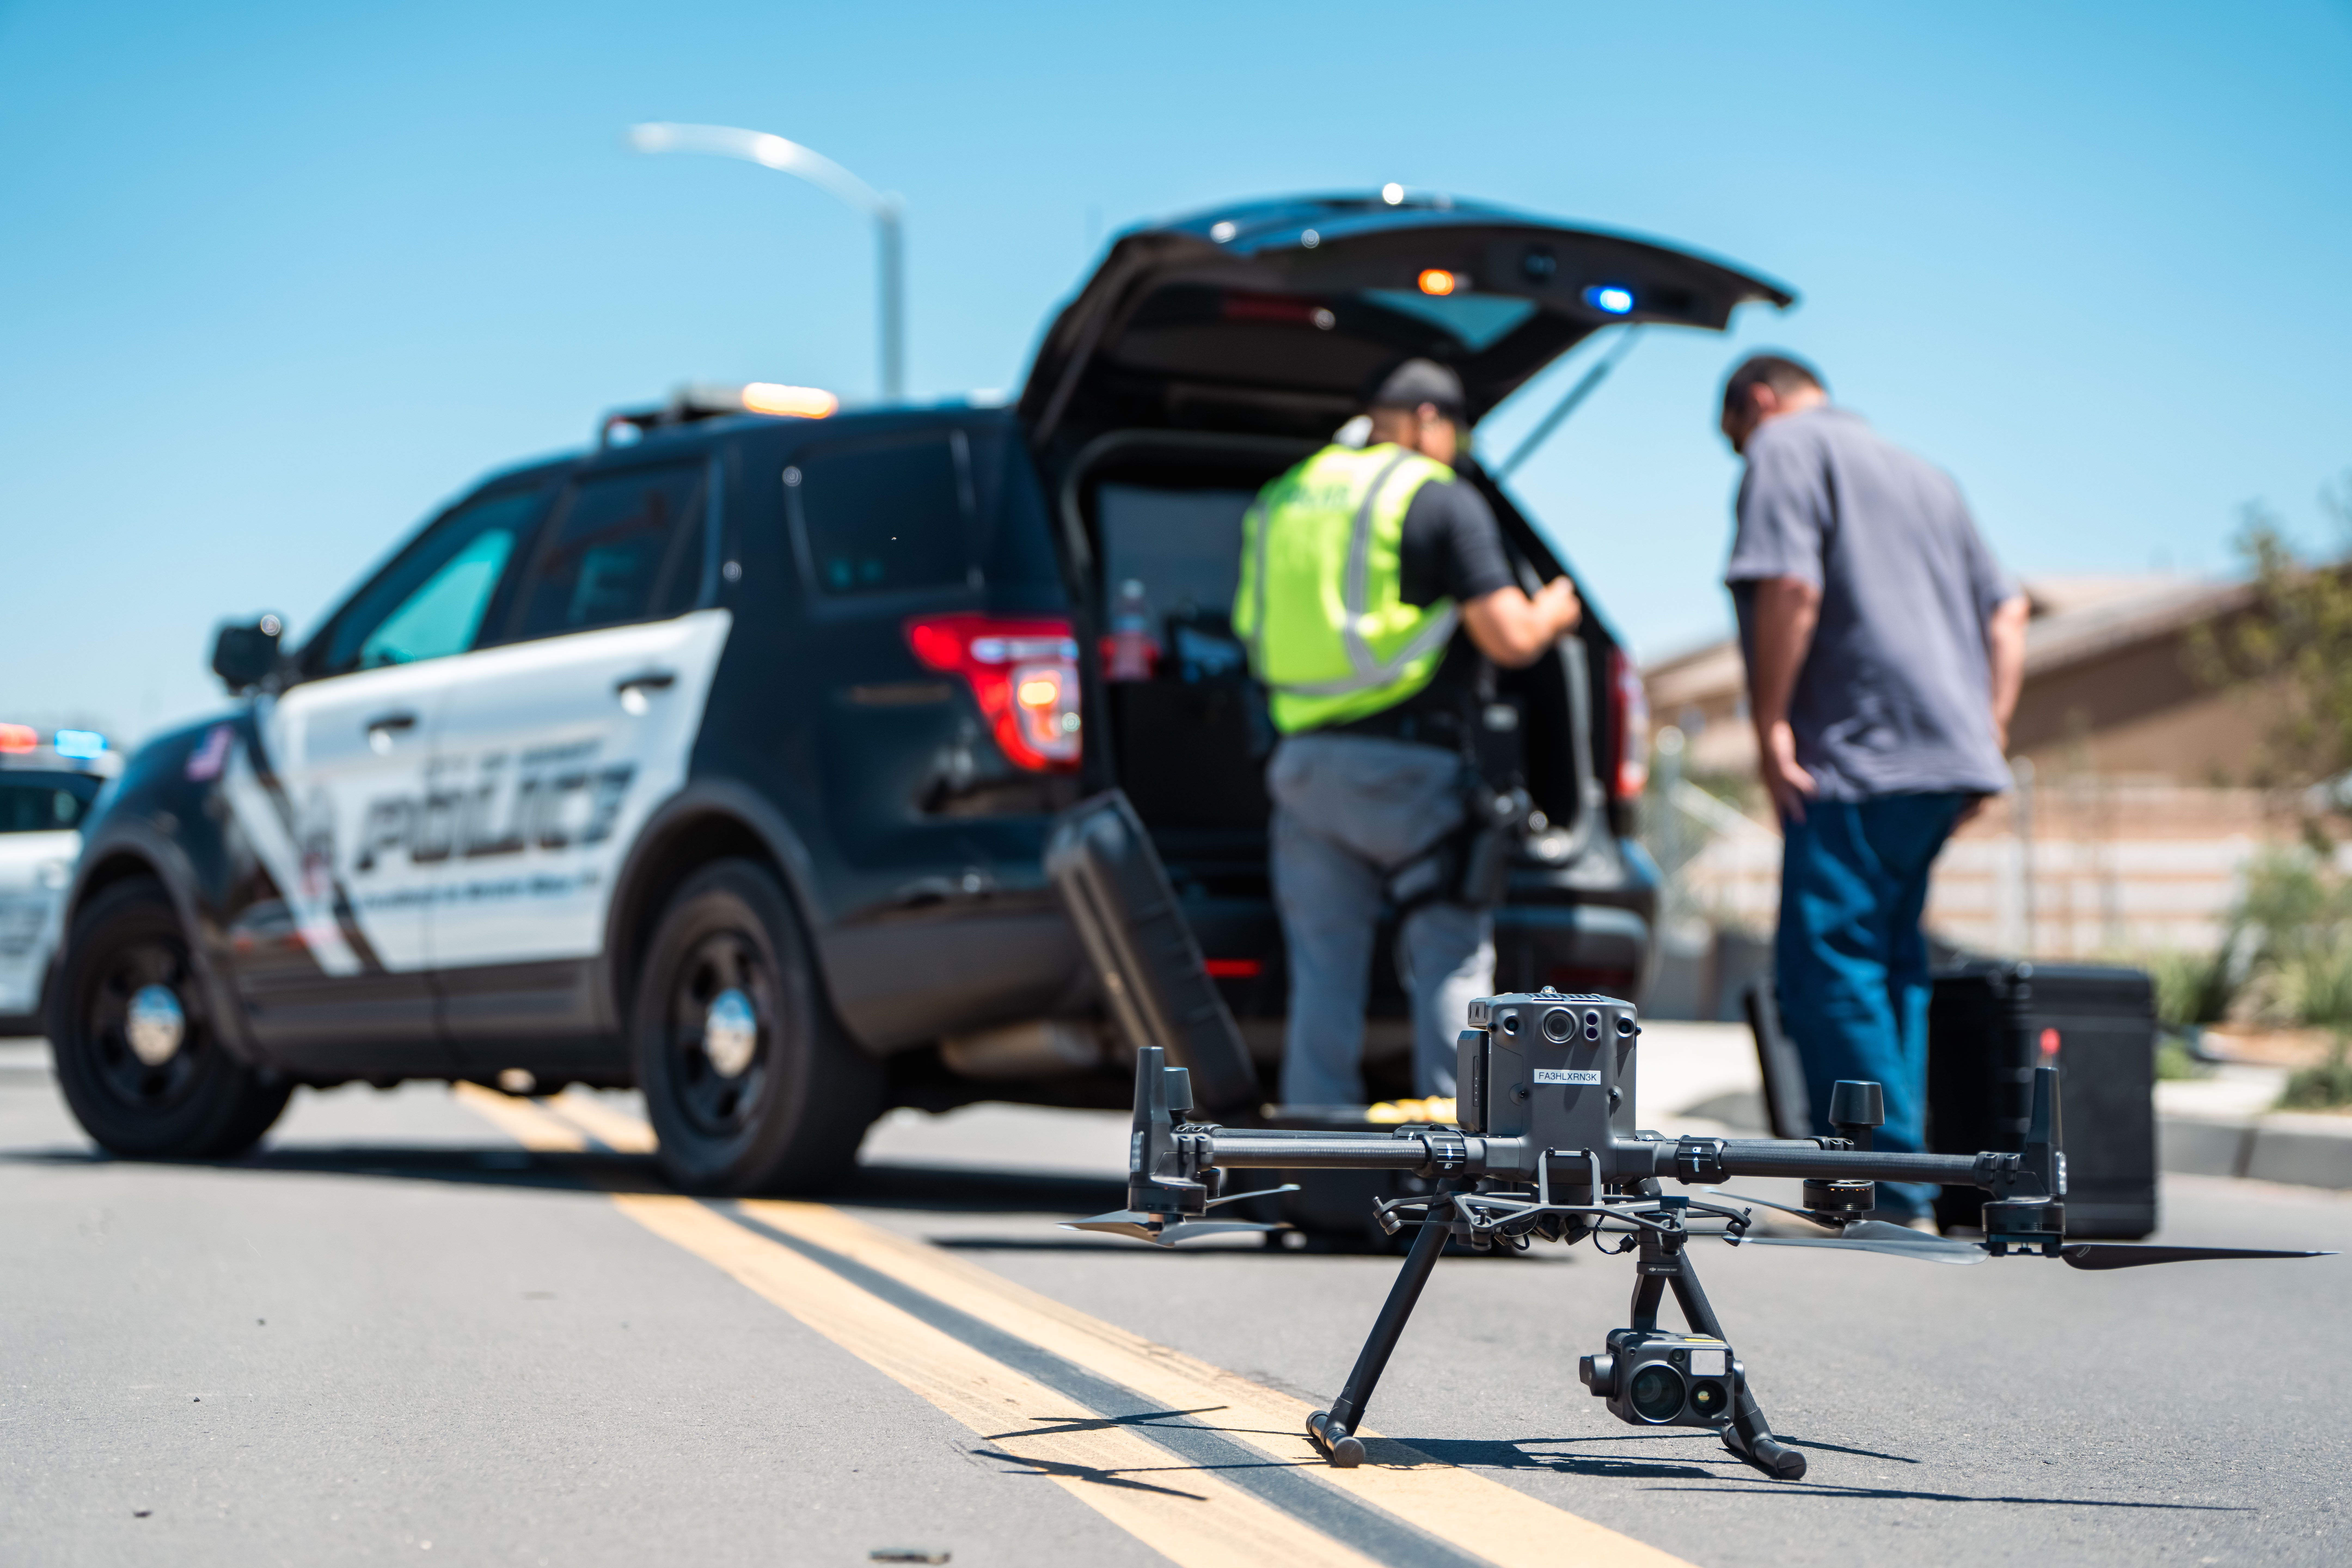 Hemet Police Department Launches Drone as a First Responder Program